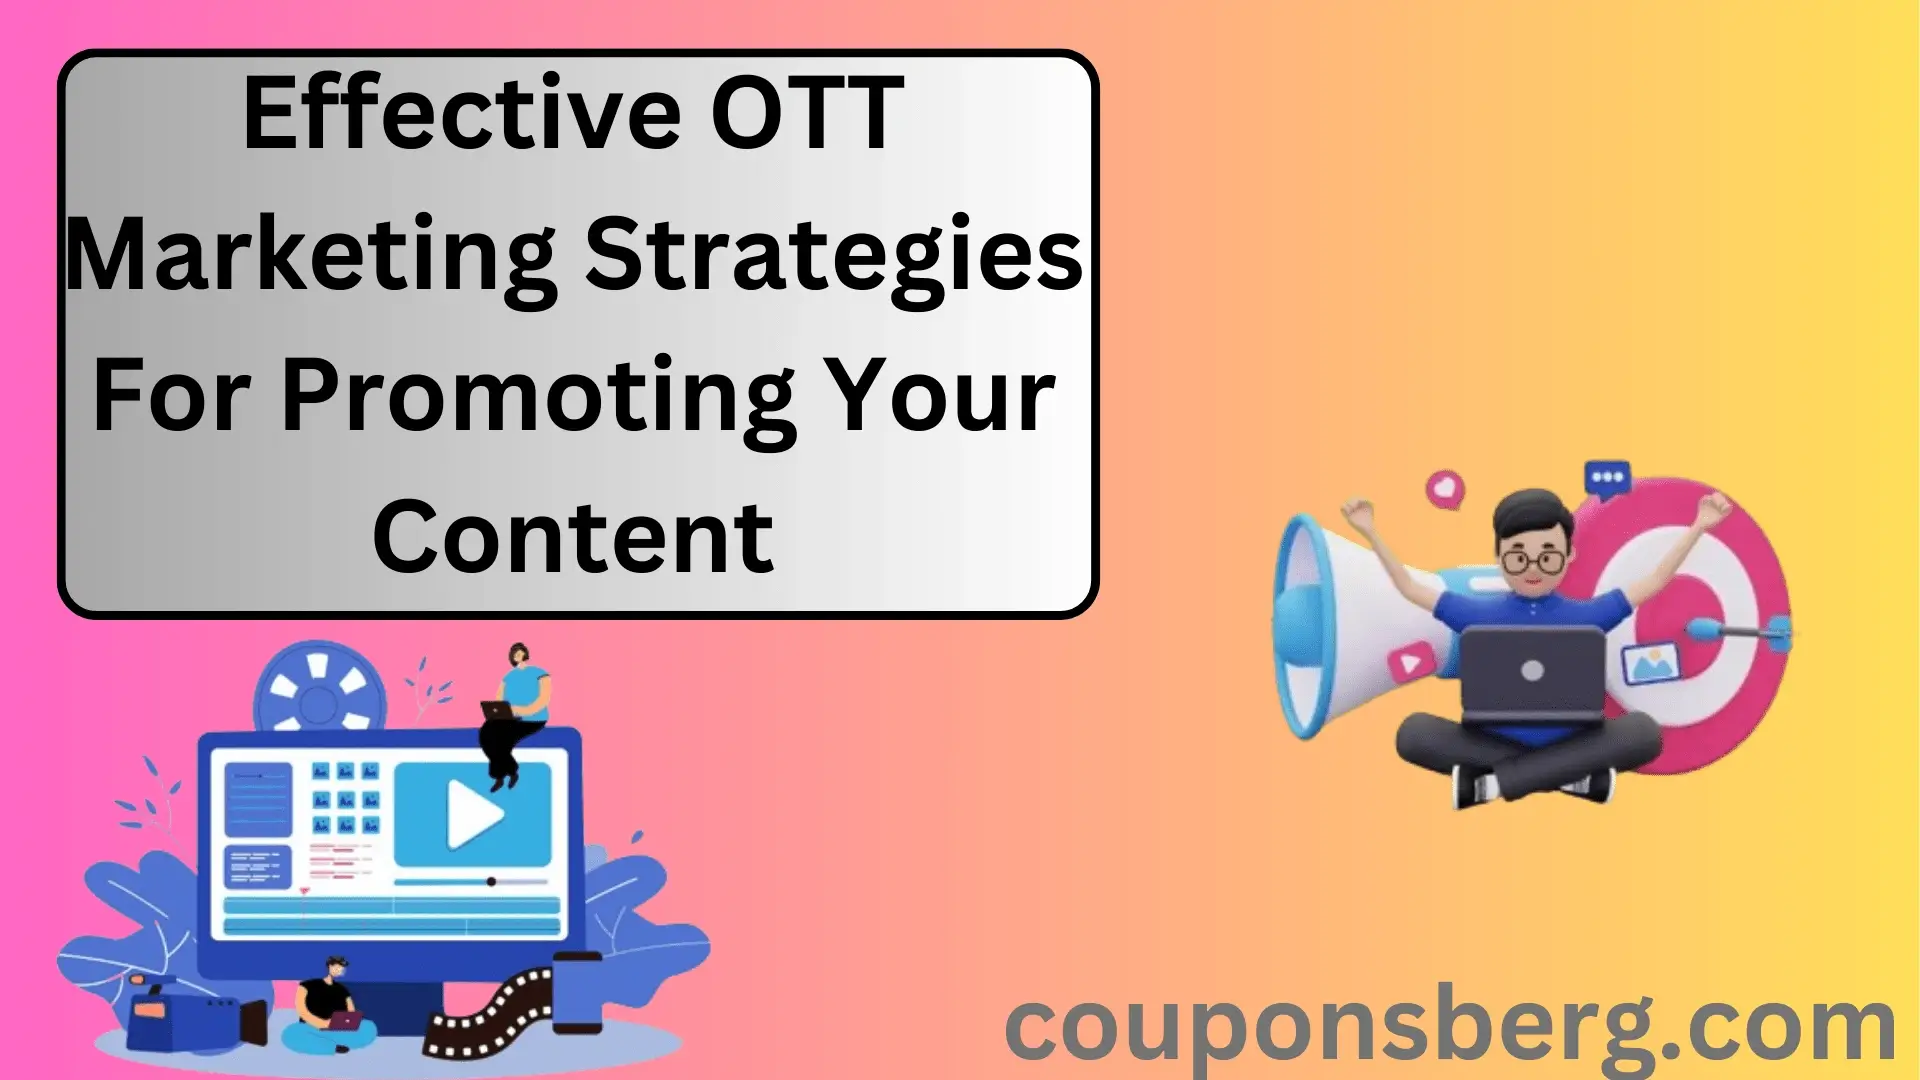 Effective OTT Marketing Strategies For Promoting Your Content